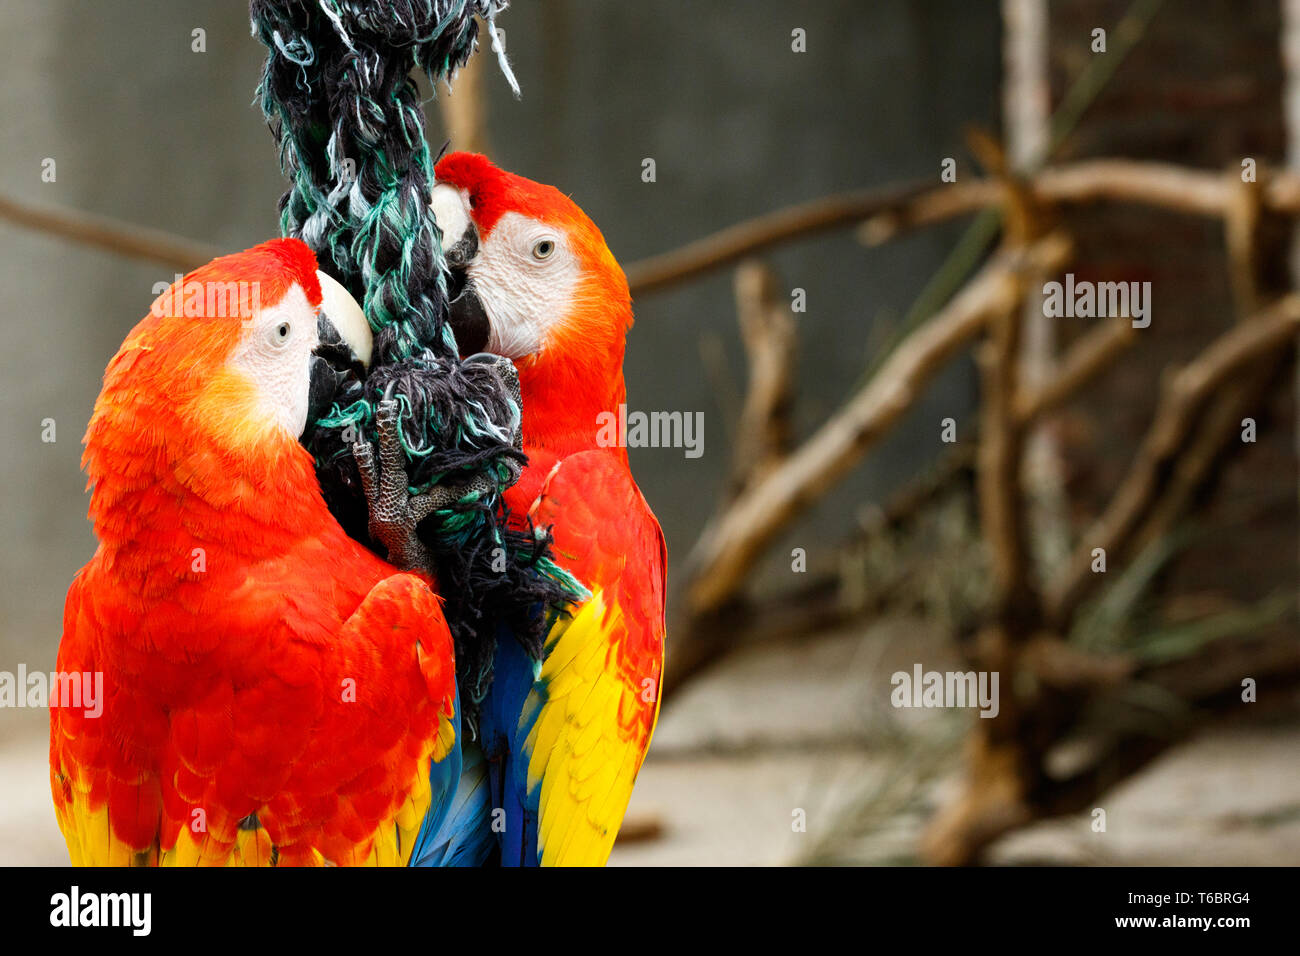 Parrots clinging on a rope Stock Photo